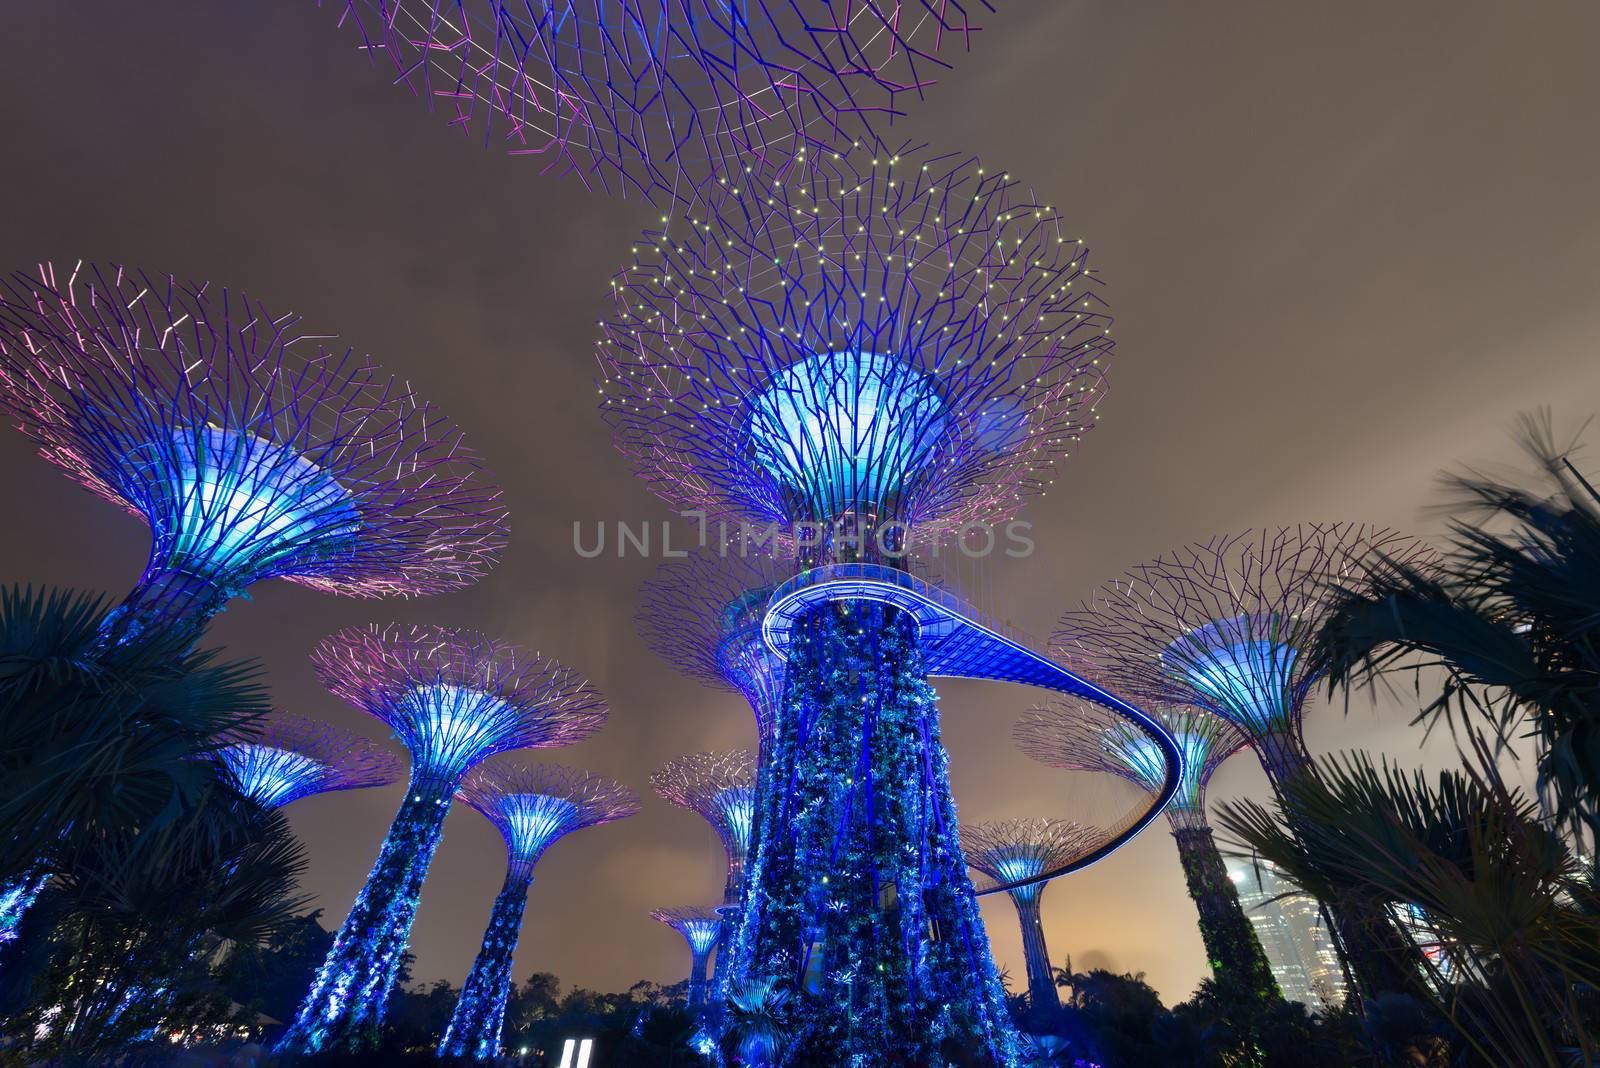 SINGAPORE - 31 DEC, 2013: Gardens by the Bay night view with amazing illumination. Supertree Grove and light show is popular Marina Bay Sands tourist attraction 